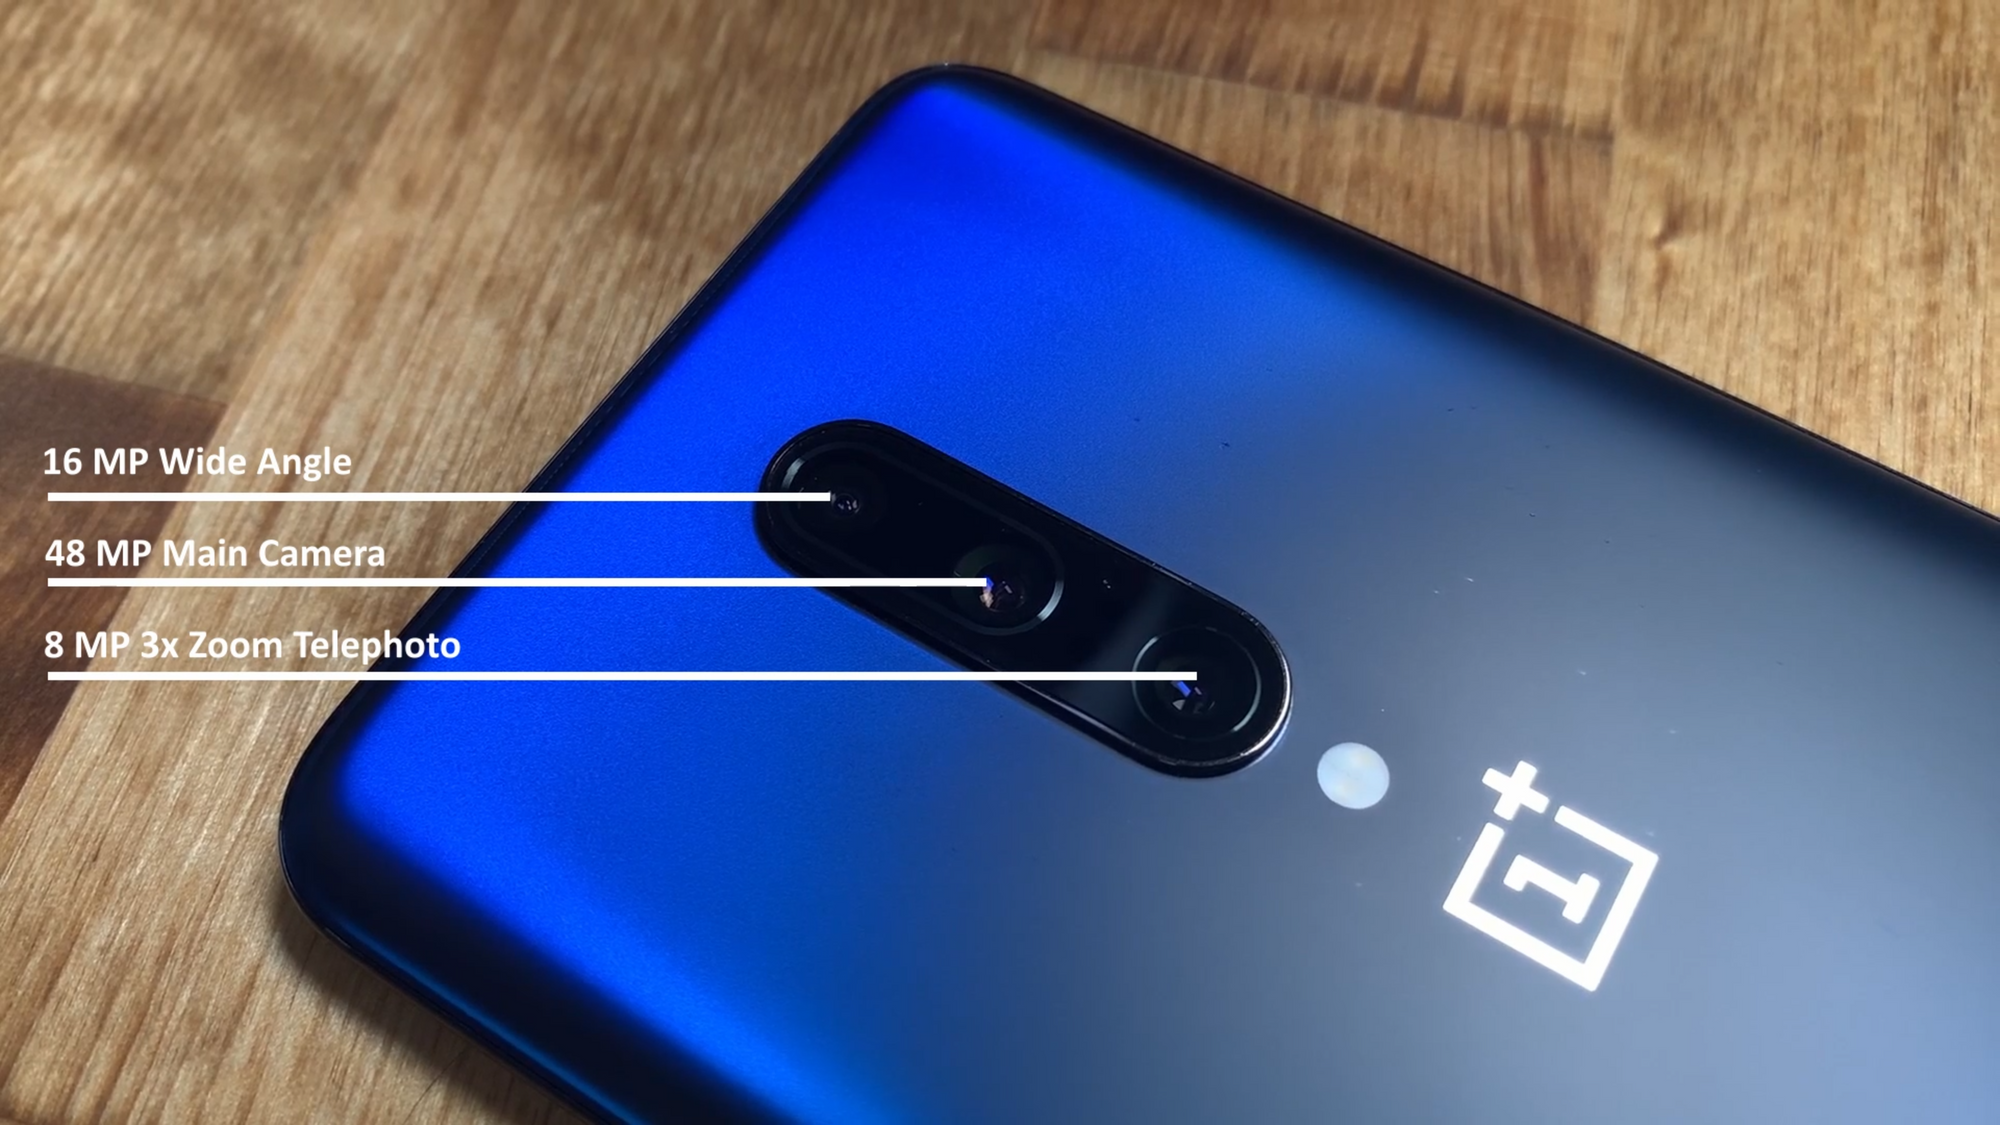 OnePlus 7 Pro Review in 2020